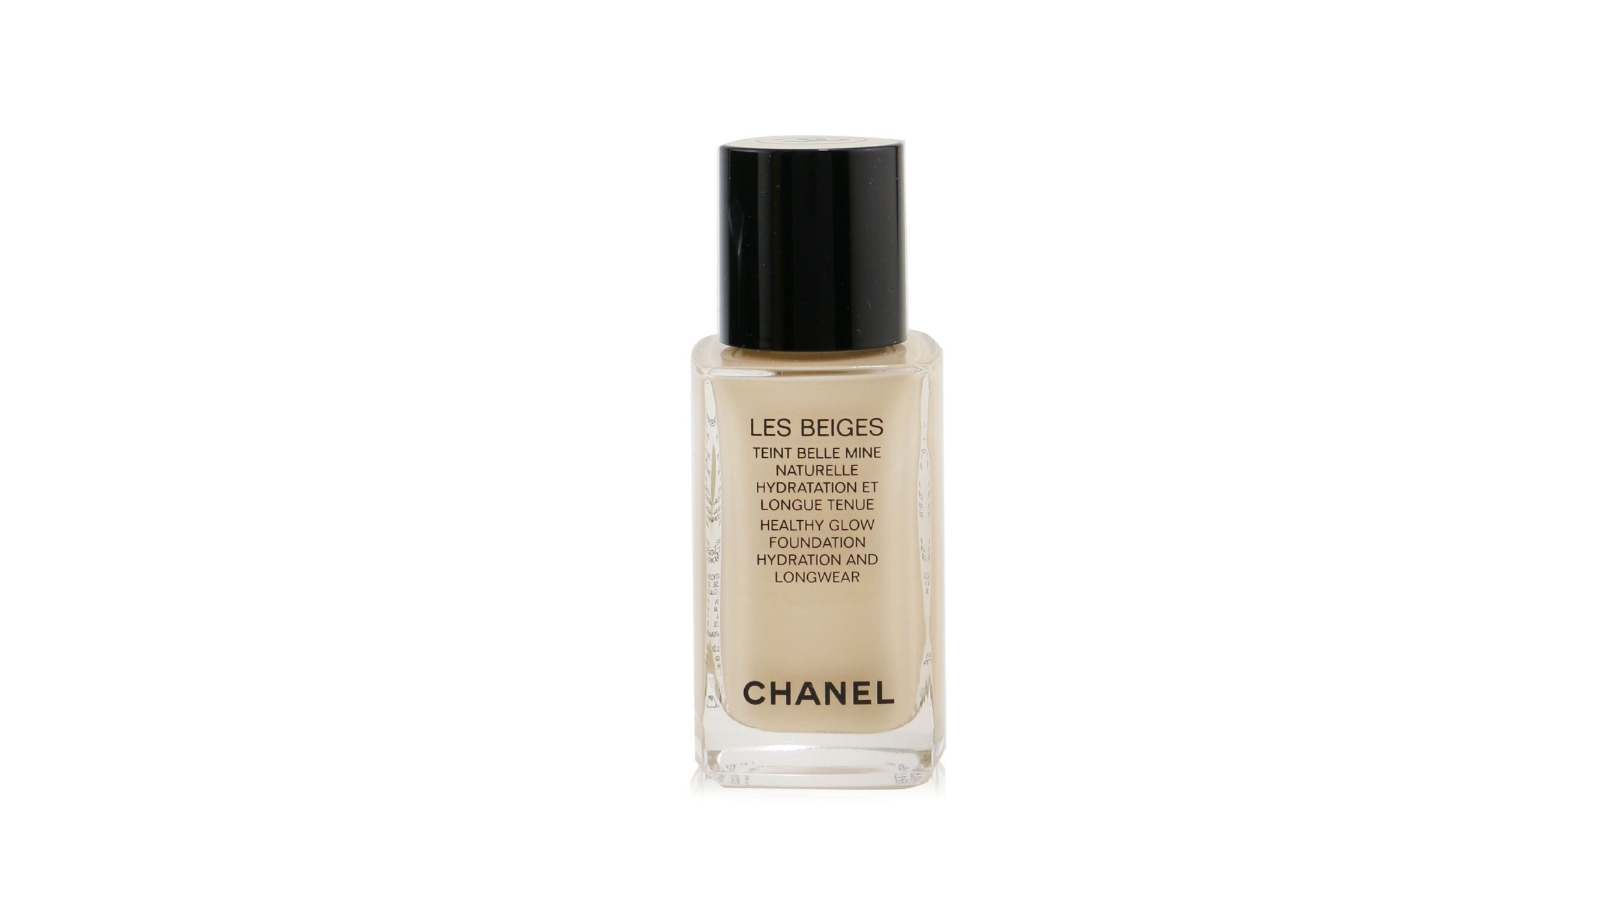 CHANEL Foundation in Face Makeup 